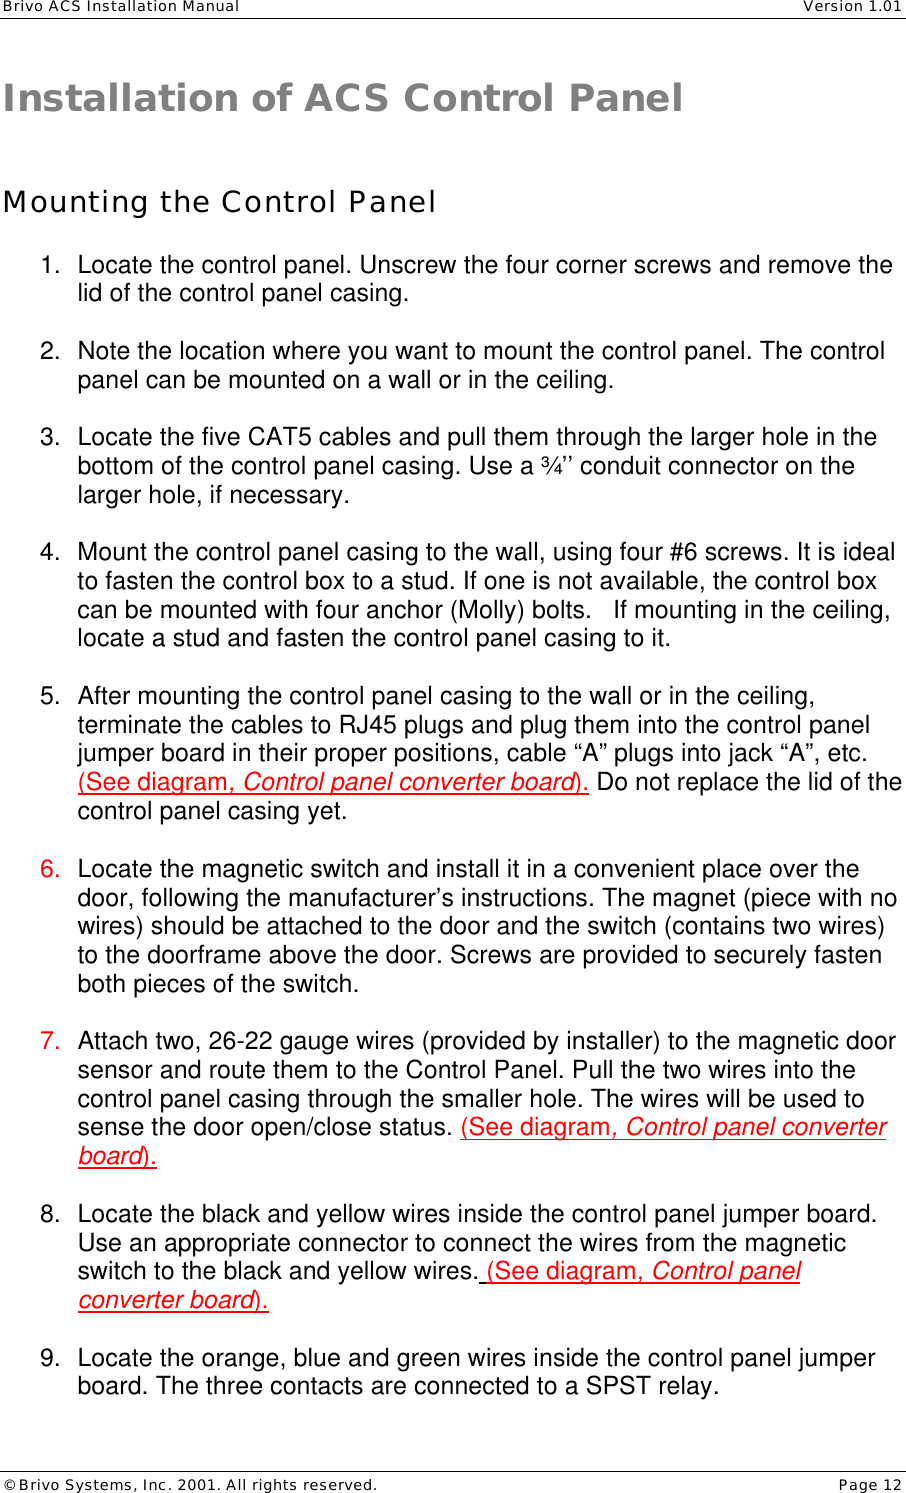 Brivo ACS Installation Manual    Version 1.01 © Brivo Systems, Inc. 2001. All rights reserved.    Page 12 Installation of ACS Control Panel    Mounting the Control Panel  1. Locate the control panel. Unscrew the four corner screws and remove the lid of the control panel casing.  2. Note the location where you want to mount the control panel. The control panel can be mounted on a wall or in the ceiling.  3. Locate the five CAT5 cables and pull them through the larger hole in the bottom of the control panel casing. Use a ¾’’ conduit connector on the larger hole, if necessary.   4. Mount the control panel casing to the wall, using four #6 screws. It is ideal to fasten the control box to a stud. If one is not available, the control box can be mounted with four anchor (Molly) bolts.   If mounting in the ceiling, locate a stud and fasten the control panel casing to it.  5. After mounting the control panel casing to the wall or in the ceiling, terminate the cables to RJ45 plugs and plug them into the control panel jumper board in their proper positions, cable “A” plugs into jack “A”, etc. (See diagram, Control panel converter board). Do not replace the lid of the control panel casing yet.  6. Locate the magnetic switch and install it in a convenient place over the door, following the manufacturer’s instructions. The magnet (piece with no wires) should be attached to the door and the switch (contains two wires) to the doorframe above the door. Screws are provided to securely fasten both pieces of the switch.   7. Attach two, 26-22 gauge wires (provided by installer) to the magnetic door sensor and route them to the Control Panel. Pull the two wires into the control panel casing through the smaller hole. The wires will be used to sense the door open/close status. (See diagram, Control panel converter board).  8. Locate the black and yellow wires inside the control panel jumper board. Use an appropriate connector to connect the wires from the magnetic switch to the black and yellow wires. (See diagram, Control panel converter board).  9. Locate the orange, blue and green wires inside the control panel jumper board. The three contacts are connected to a SPST relay. 